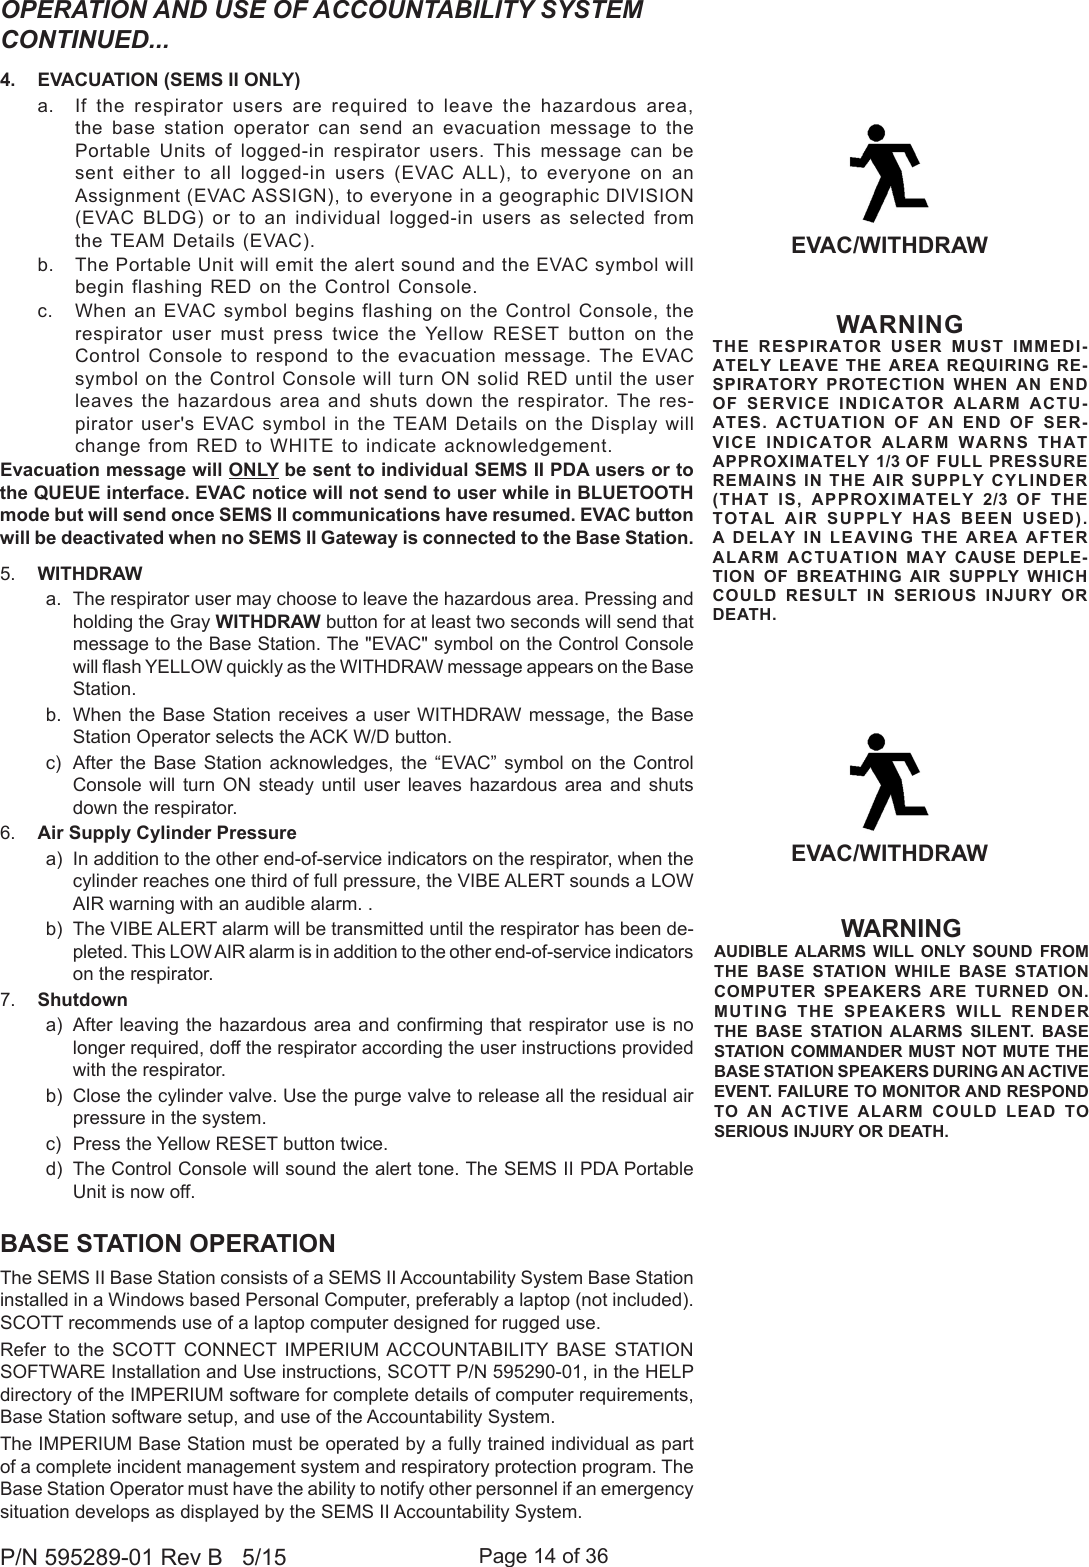 Page 14 of 36P/N 595289-01 Rev B   5/154.  EVACUATION (SEMS II ONLY)a.  If the respirator users are required to leave the hazardous area, the base station operator can send an evacuation message to the Portable Units of logged-in respirator users. This message can be sent either to all logged-in users (EVAC ALL), to everyone on an Assignment (EVAC ASSIGN), to everyone in a geographic DIVISION (EVAC BLDG) or to an individual logged-in users as selected from the TEAM Details (EVAC). b.  The Portable Unit will emit the alert sound and the EVAC symbol will begin flashing RED on the Control Console.c.  When an EVAC symbol begins flashing on the Control Console, the respirator user must press twice the Yellow RESET button on the Control Console to respond to the evacuation message. The EVAC symbol on the Control Console will turn ON solid RED until the user leaves the hazardous area and shuts down the respirator. The res-pirator user&apos;s EVAC symbol in the TEAM Details on the Display will change from RED to WHITE to indicate acknowledgement.Evacuation message will ONLY be sent to individual SEMS II PDA users or to the QUEUE interface. EVAC notice will not send to user while in BLUETOOTH mode but will send once SEMS II communications have resumed. EVAC button will be deactivated when no SEMS II Gateway is connected to the Base Station.5.  WITHDRAWa.  The respirator user may choose to leave the hazardous area. Pressing and holding the Gray WITHDRAW button for at least two seconds will send that message to the Base Station. The &quot;EVAC&quot; symbol on the Control Console will ash YELLOW quickly as the WITHDRAW message appears on the Base Station. b.  When the Base Station receives a user WITHDRAW message, the Base Station Operator selects the ACK W/D button.c)  After the Base Station acknowledges, the “EVAC” symbol on the Control Console will turn ON steady until user leaves hazardous area and shuts down the respirator.6.  Air Supply Cylinder Pressurea)  In addition to the other end-of-service indicators on the respirator, when the cylinder reaches one third of full pressure, the VIBE ALERT sounds a LOW AIR warning with an audible alarm. .b)  The VIBE ALERT alarm will be transmitted until the respirator has been de-pleted. This LOW AIR alarm is in addition to the other end-of-service indicators on the respirator.7.  Shutdowna)  After leaving the hazardous  area  and conrming that respirator use is no longer required, doff the respirator according the user instructions provided with the respirator.b)  Close the cylinder valve. Use the purge valve to release all the residual air pressure in the system.c)  Press the Yellow RESET button twice.d)  The Control Console will sound the alert tone. The SEMS II PDA Portable Unit is now off.EVAC/WITHDRAWWARNINGTHE RESPIRATOR USER MUST IMMEDI-ATELY LEAVE THE AREA REQUIRING RE-SPIRATORY PROTECTION WHEN AN END OF SERVICE INDICATOR ALARM ACTU-ATES. ACTUATION OF AN END OF SER-VICE INDICATOR ALARM WARNS THAT APPROXIMATELY 1/3 OF FULL PRESSURE REMAINS IN THE AIR SUPPLY CYLINDER (THAT IS, APPROXIMATELY 2/3 OF THE TOTAL AIR SUPPLY HAS BEEN USED). A DELAY IN LEAVING THE AREA AFTER ALARM ACTUATION MAY CAUSE DEPLE-TION OF BREATHING AIR SUPPLY WHICH COULD RESULT IN SERIOUS INJURY OR DEATH.BASE STATION OPERATIONThe SEMS II Base Station consists of a SEMS II Accountability System Base Station installed in a Windows based Personal Computer, preferably a laptop (not included). SCOTT recommends use of a laptop computer designed for rugged use. Refer to the SCOTT CONNECT IMPERIUM ACCOUNTABILITY BASE STATION SOFTWARE Installation and Use instructions, SCOTT P/N 595290-01, in the HELP directory of the IMPERIUM software for complete details of computer requirements, Base Station software setup, and use of the Accountability System.The IMPERIUM Base Station must be operated by a fully trained individual as part of a complete incident management system and respiratory protection program. The Base Station Operator must have the ability to notify other personnel if an emergency situation develops as displayed by the SEMS II Accountability System.OPERATION AND USE OF ACCOUNTABILITY SYSTEM CONTINUED...WARNINGAUDIBLE ALARMS WILL ONLY SOUND FROM THE BASE STATION WHILE BASE STATION COMPUTER SPEAKERS ARE TURNED ON. MUTING THE SPEAKERS WILL RENDER THE BASE STATION ALARMS SILENT. BASE STATION COMMANDER MUST NOT MUTE THE BASE STATION SPEAKERS DURING AN ACTIVE EVENT. FAILURE TO MONITOR AND RESPOND TO AN ACTIVE ALARM COULD LEAD TO SERIOUS INJURY OR DEATH.EVAC/WITHDRAW